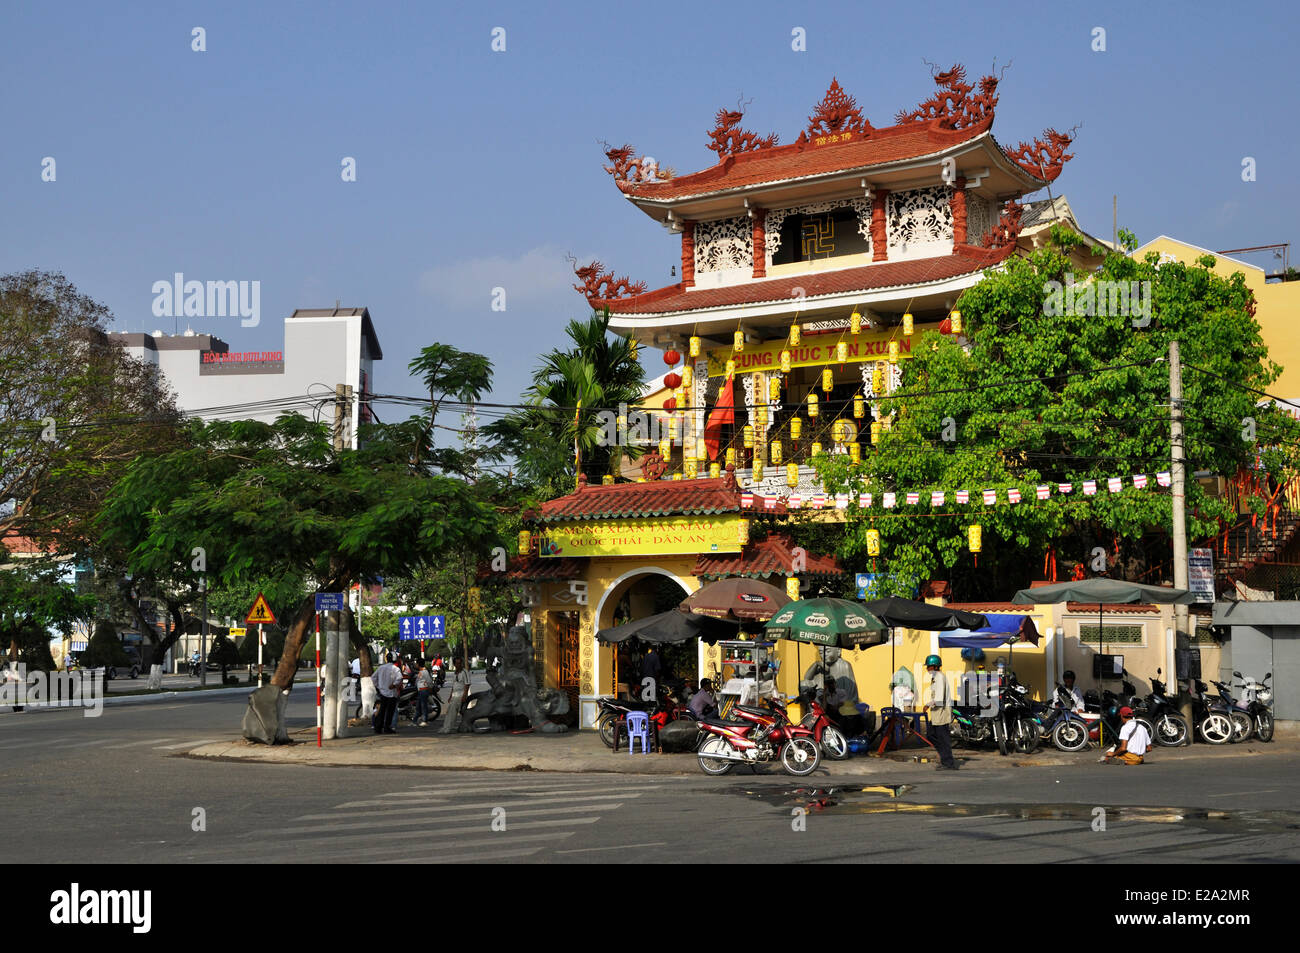 Vietnam, Can Tho province, Mekong delta, Can Tho, pagoda Stock Photo